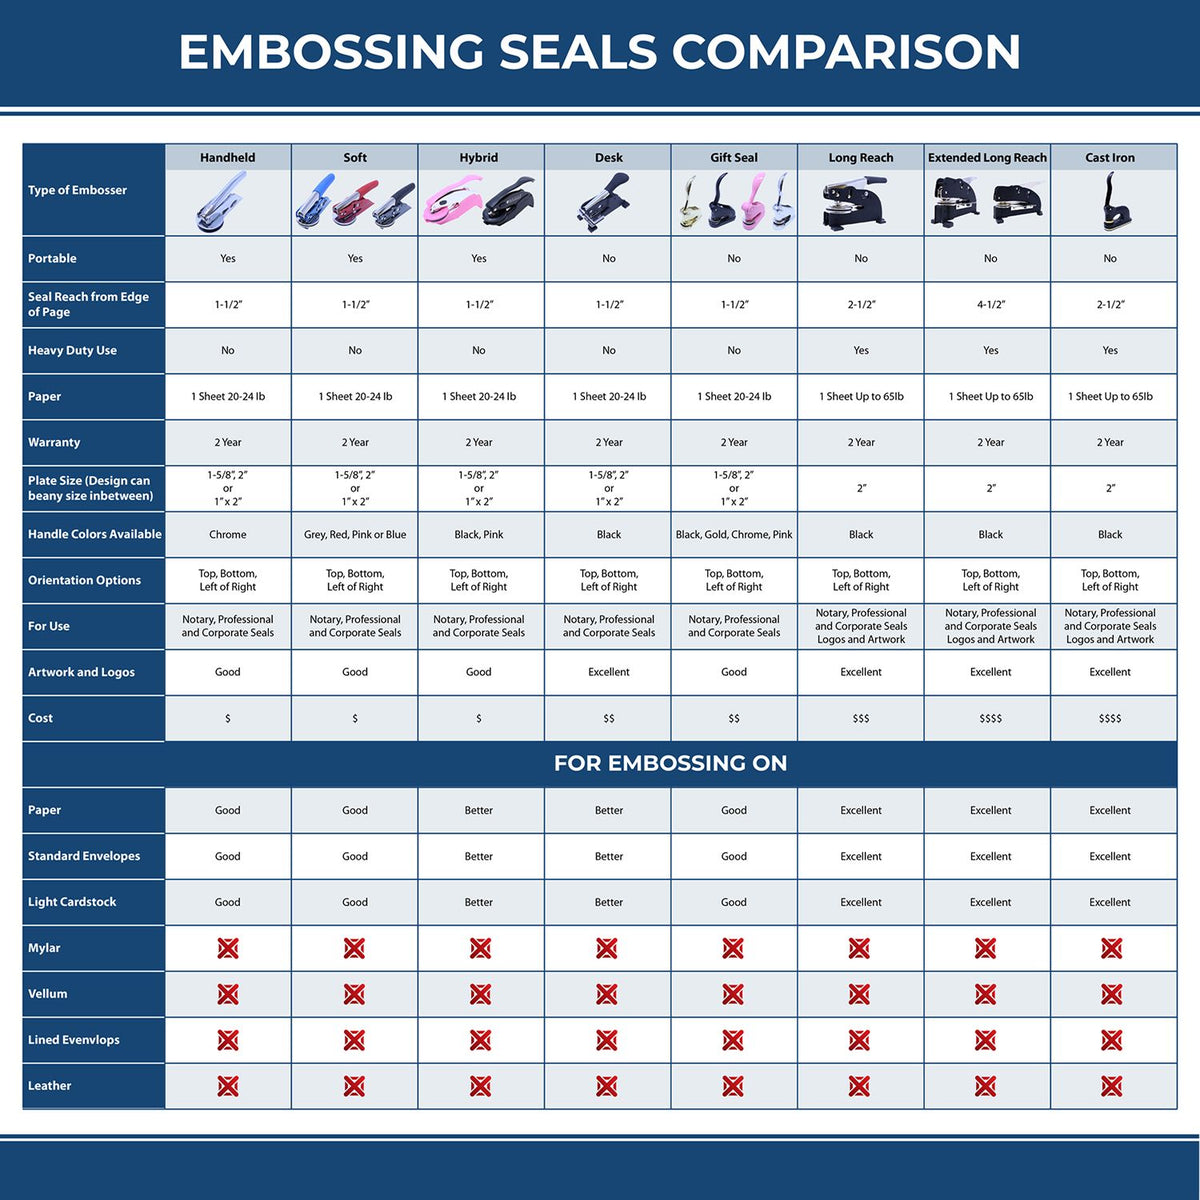 A comparison chart for the different types of mount models available for the Hybrid Colorado Geologist Seal